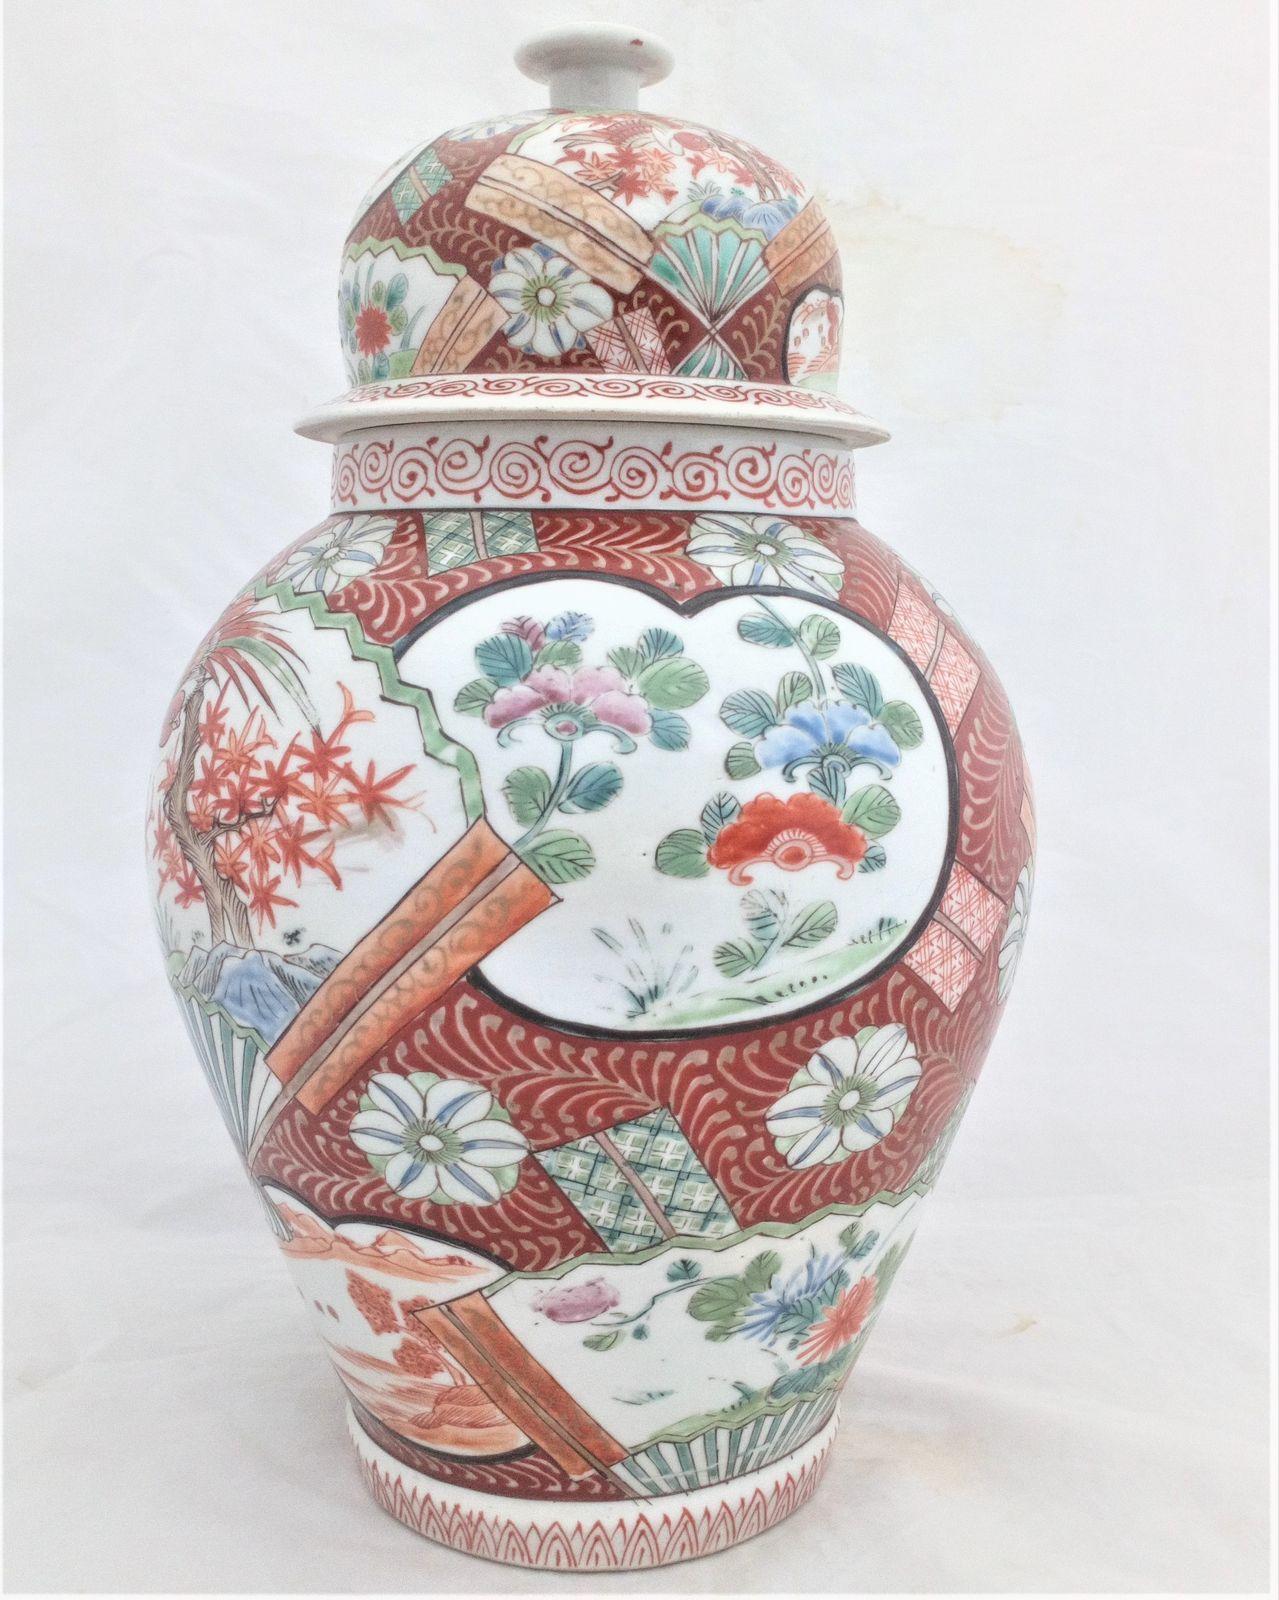 A large antique Japanese Hizen porcelain vase and cover marked Zoshuntei Saiho. Decorated in hand painted enamels with two large Japanese folding fans each painted with a colourful Asiatic Pheasant flying over a Japanese Acer.  This antique temple vase and cover dates from the mid 19th century circa 1860.